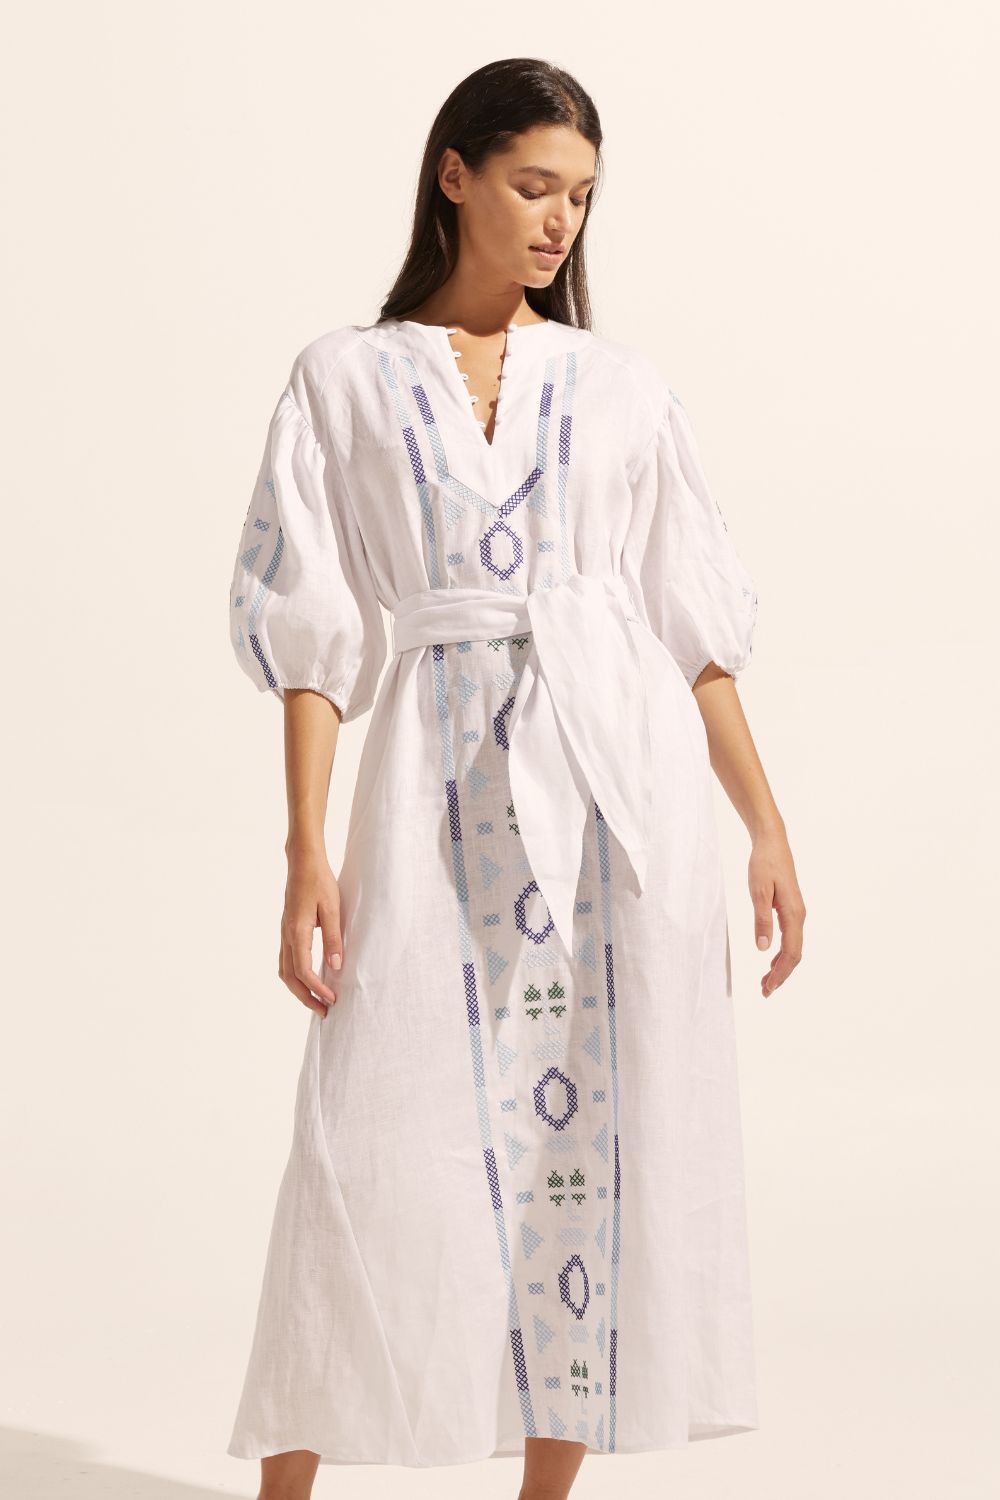 white and blue, maxi dress, embroidery, mid length sleeve, self tie fabric belt, front view image